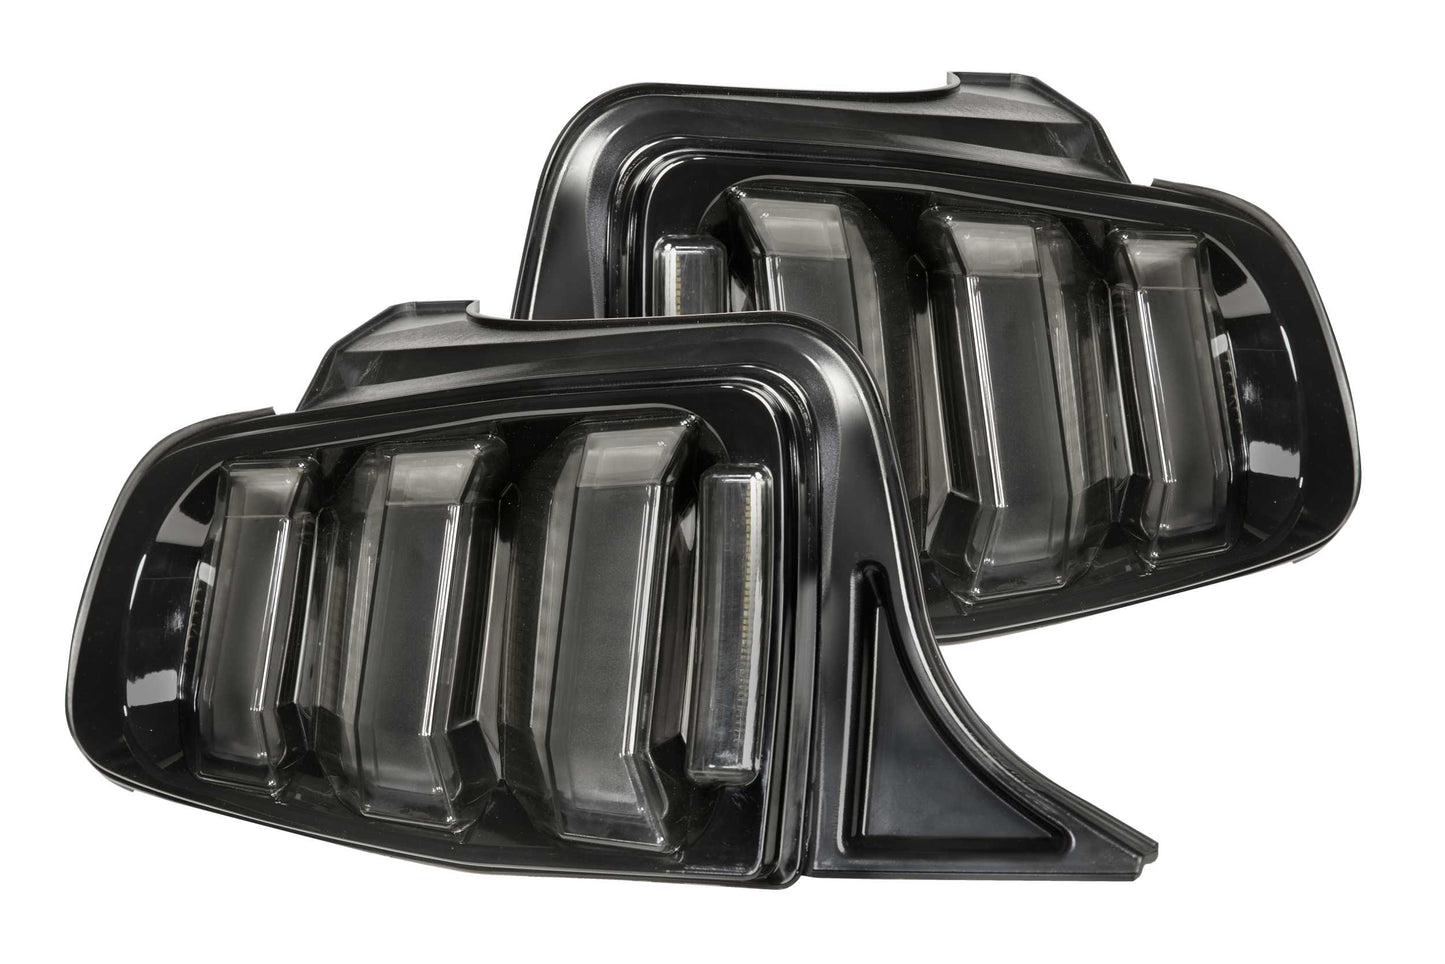 XB LED Tail Lights: Ford Mustang (13-14) (Pair / Facelift / Smoked)